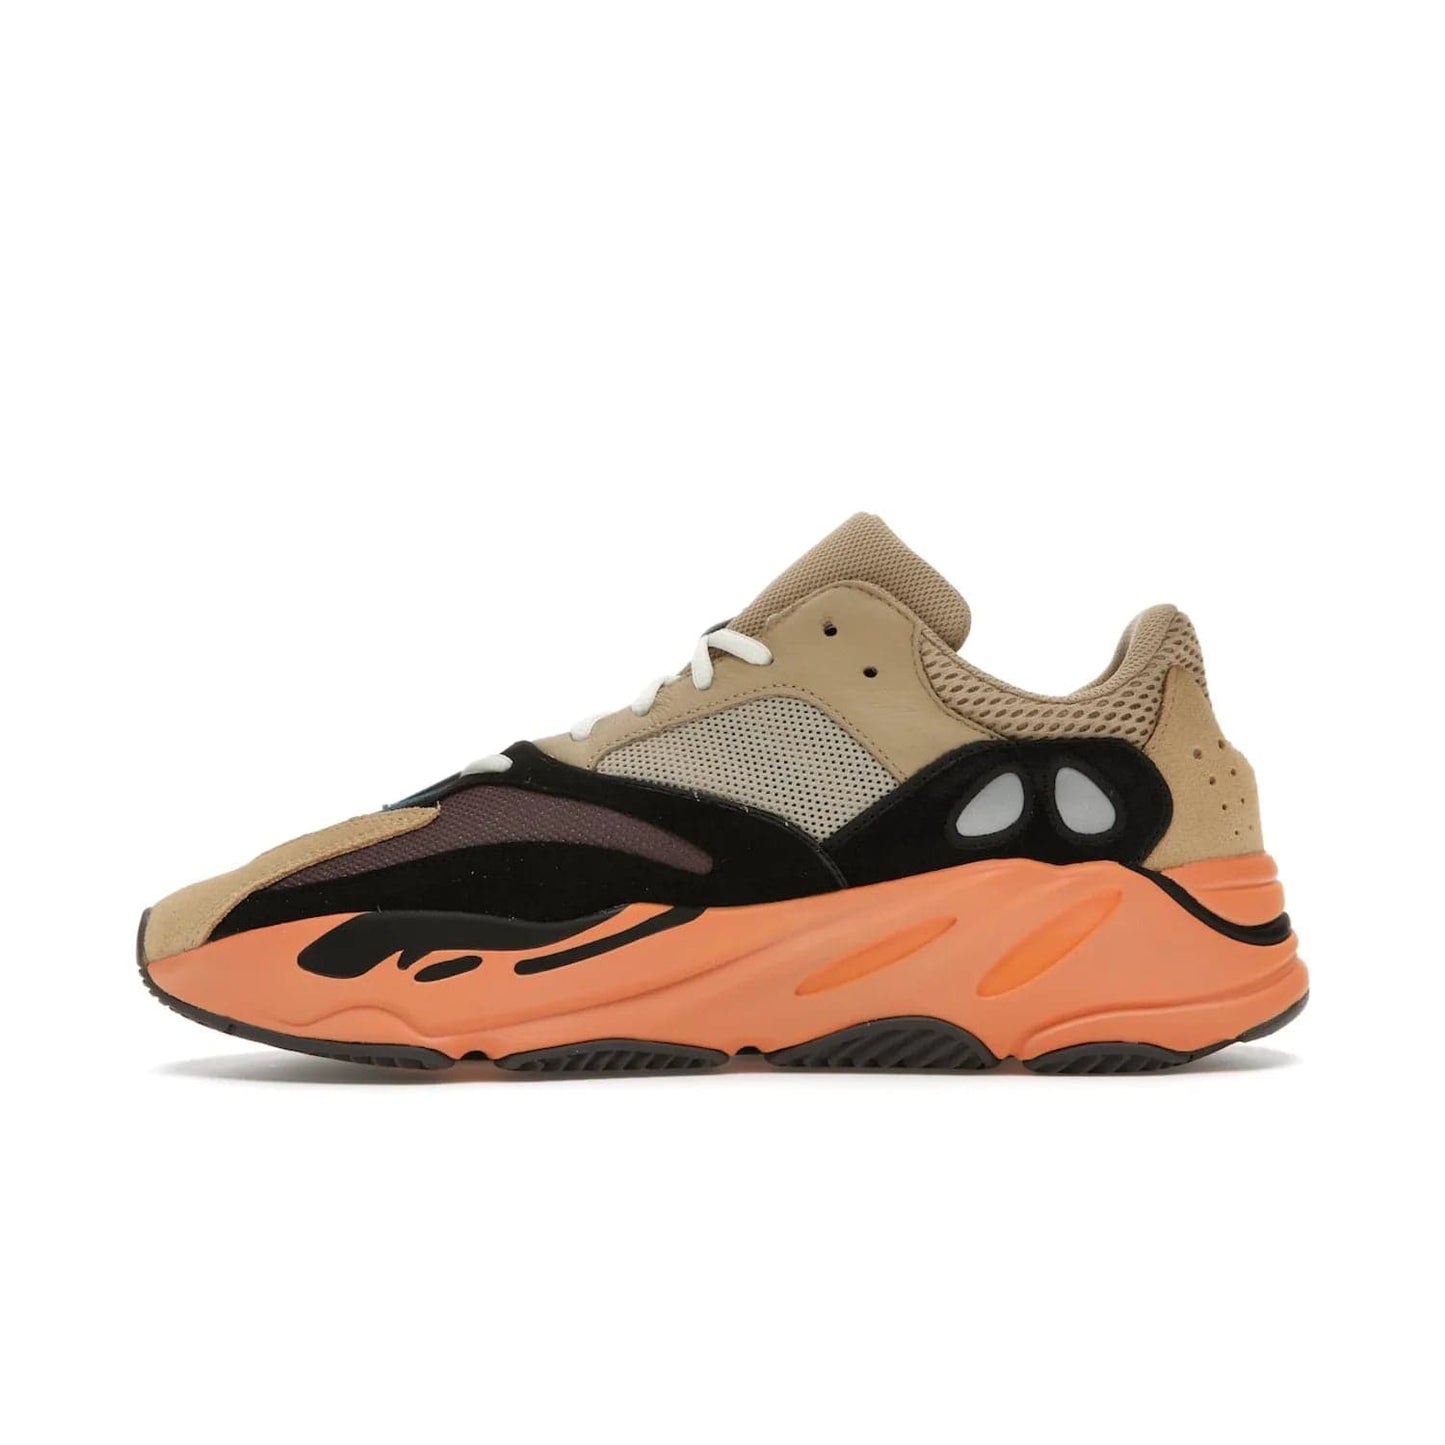 adidas Yeezy Boost 700 Enflame Amber - Image 19 - Only at www.BallersClubKickz.com - Adidas Yeezy Boost 700 Enflame Amber: Eye-catching design with pale yellow, brown, teal, and orange! Get yours in June 2021.